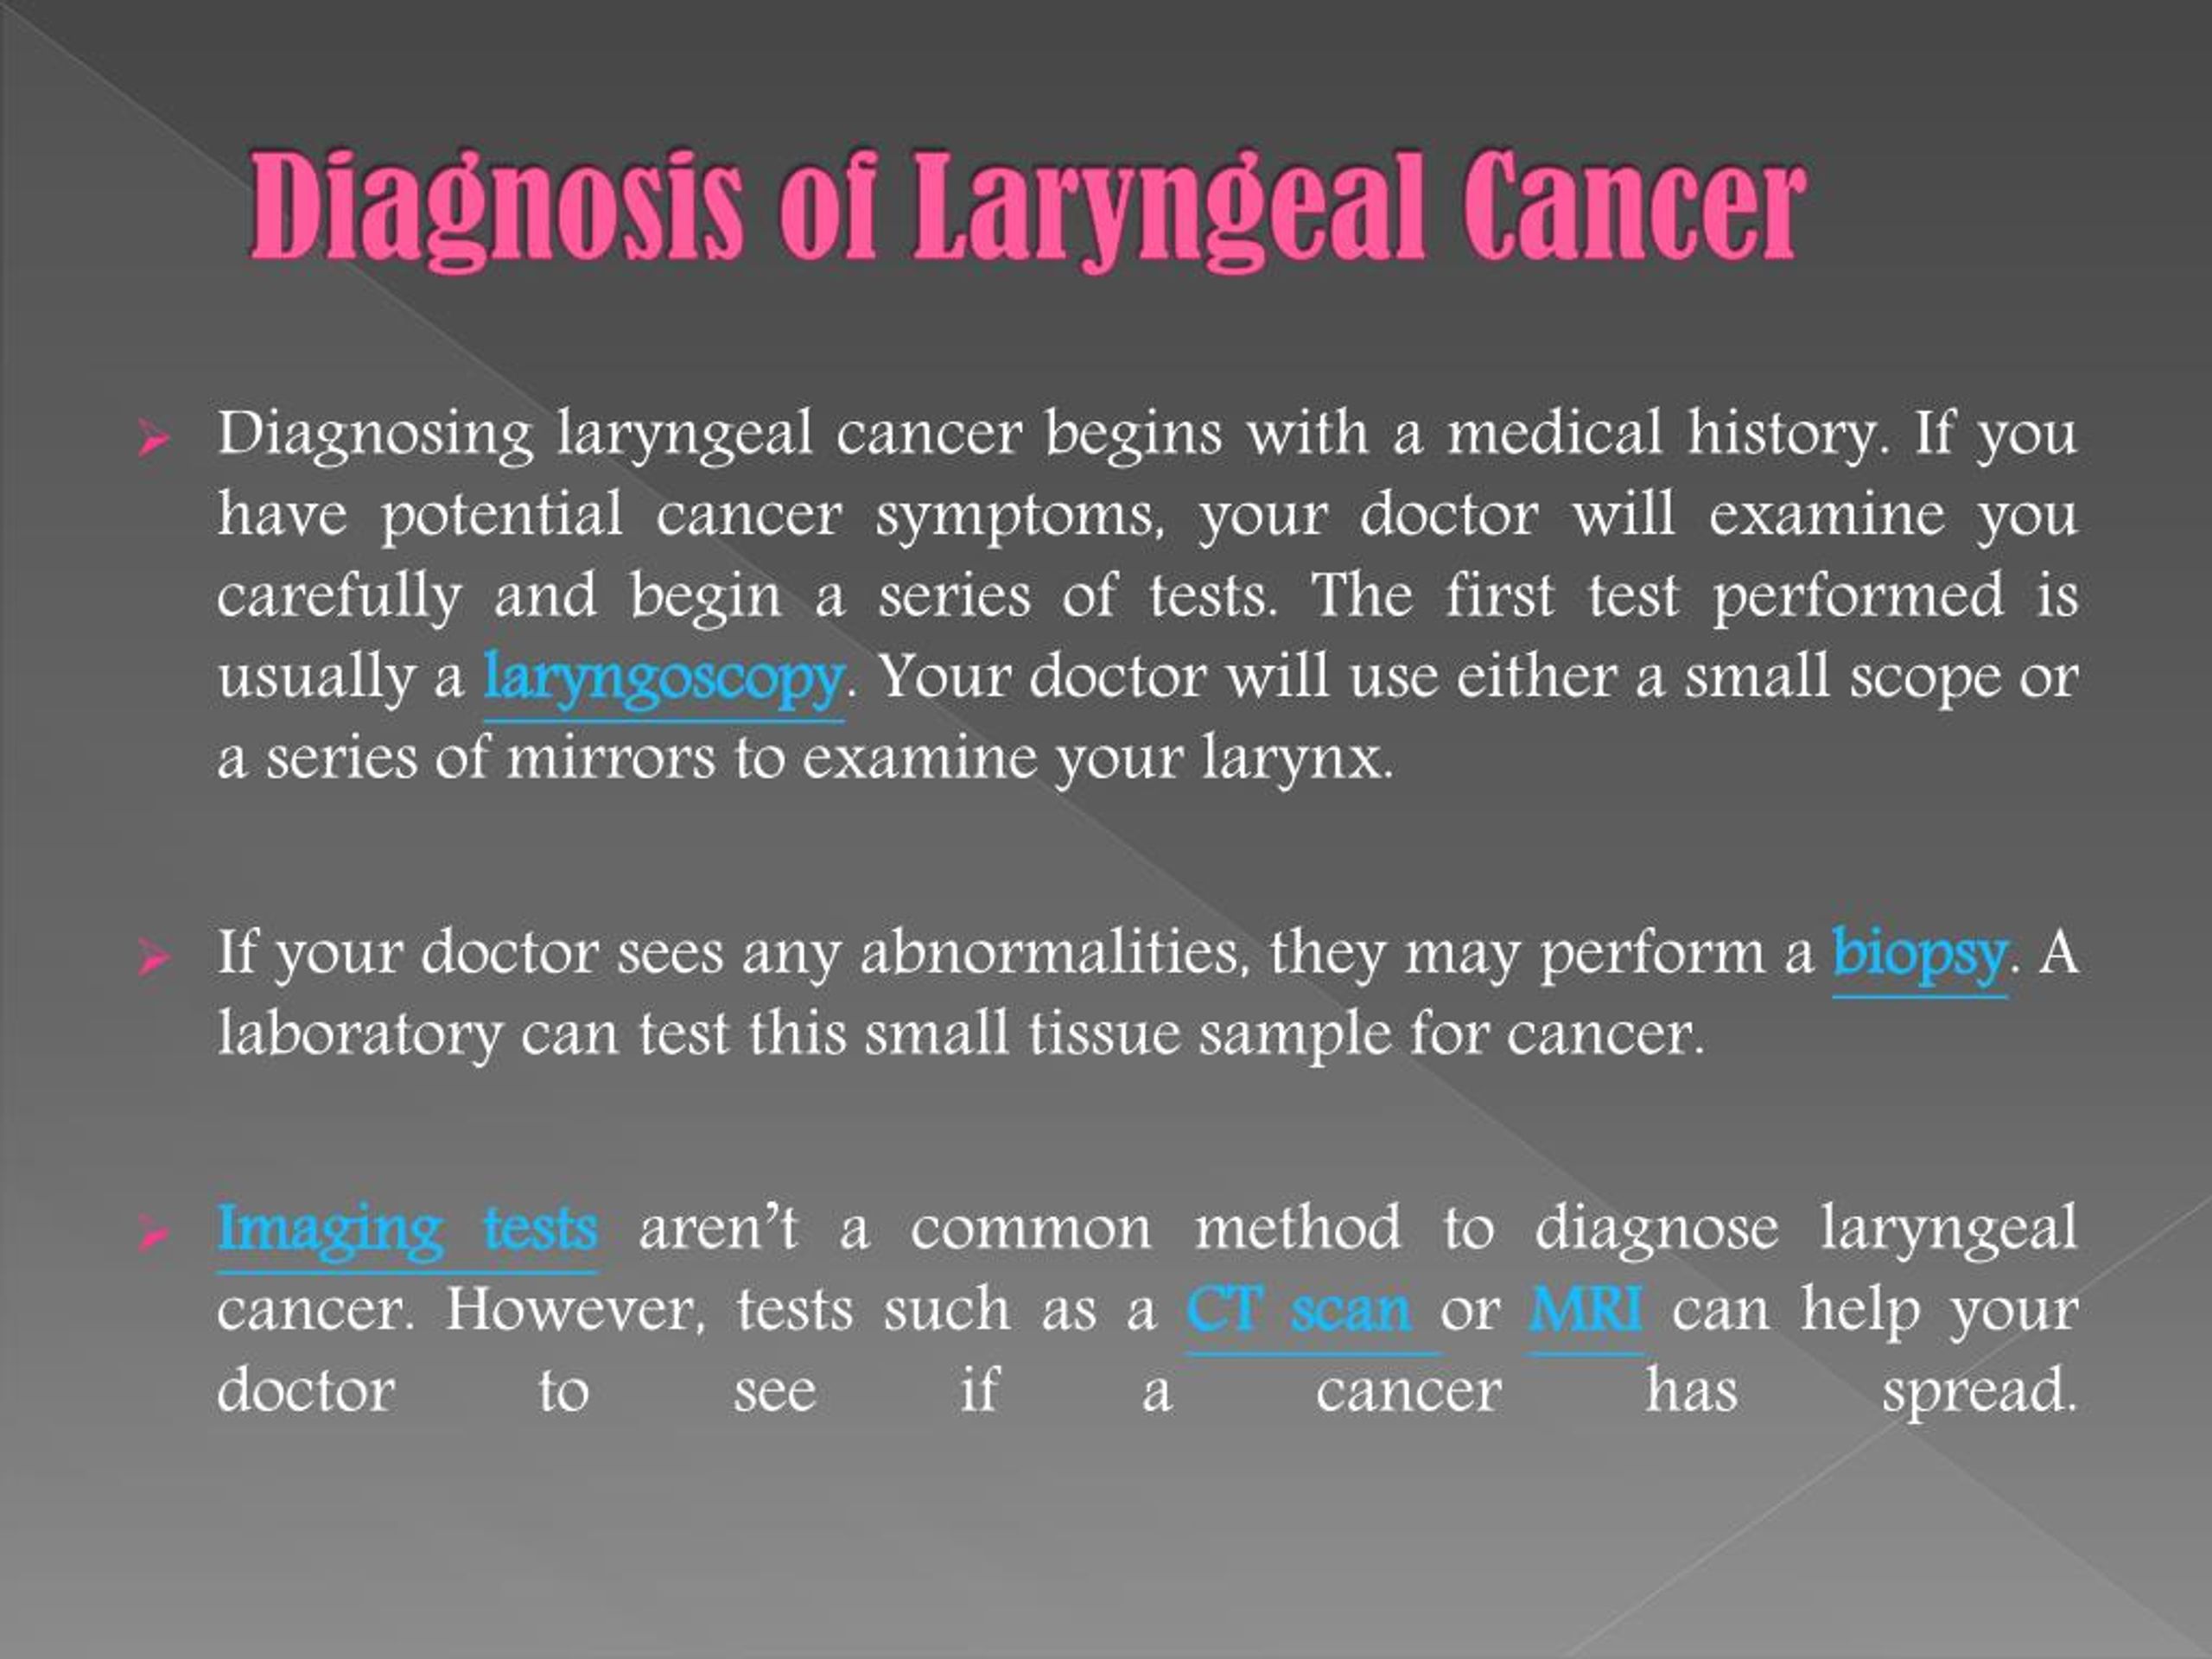 PPT - Laryngeal Cancer: Symptoms, causes, diagnosis and treatment.  PowerPoint Presentation - ID:7490261